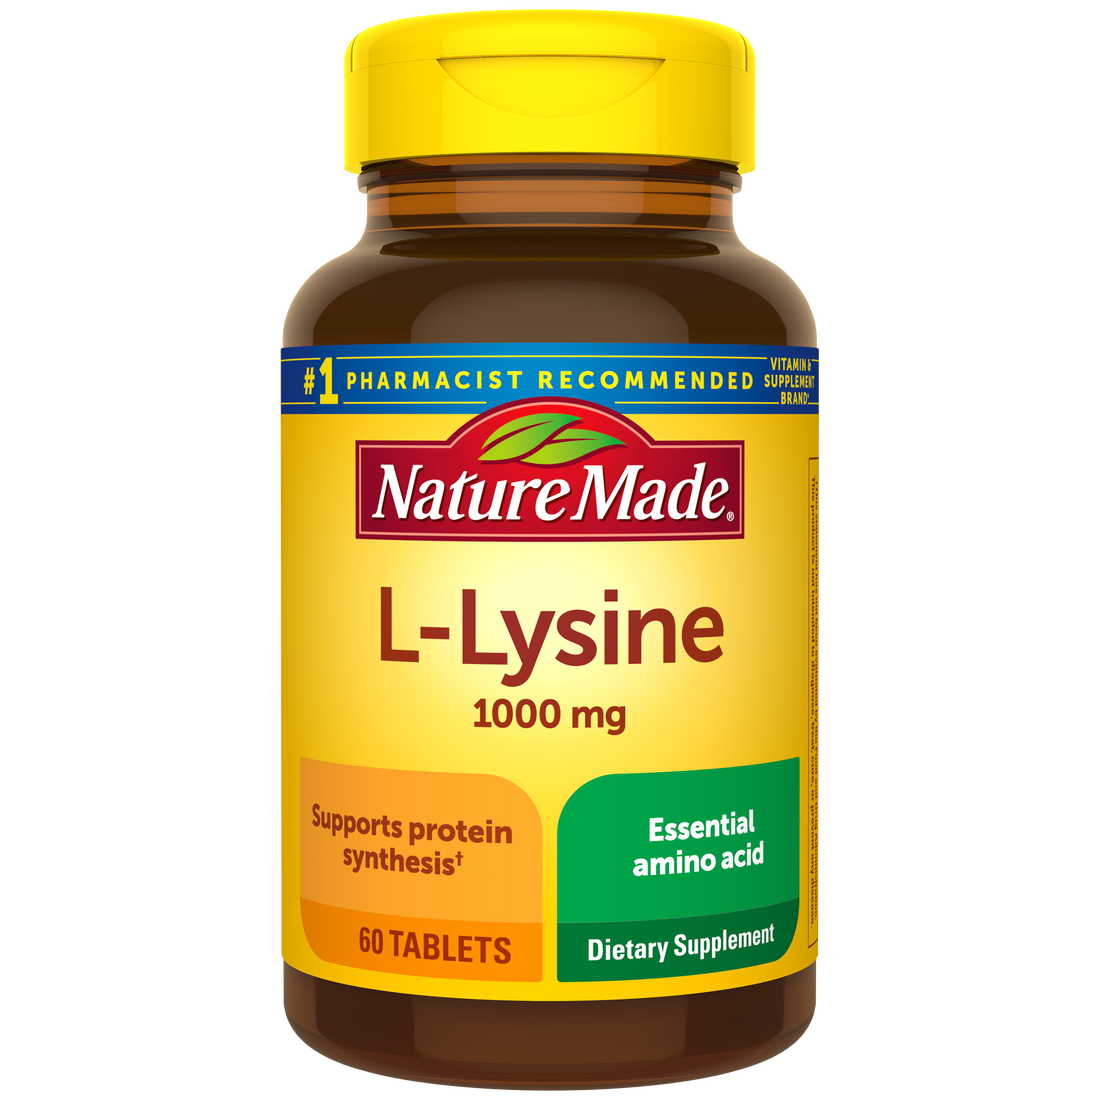 Nature Made L-Lysine 1000 mg Tablets